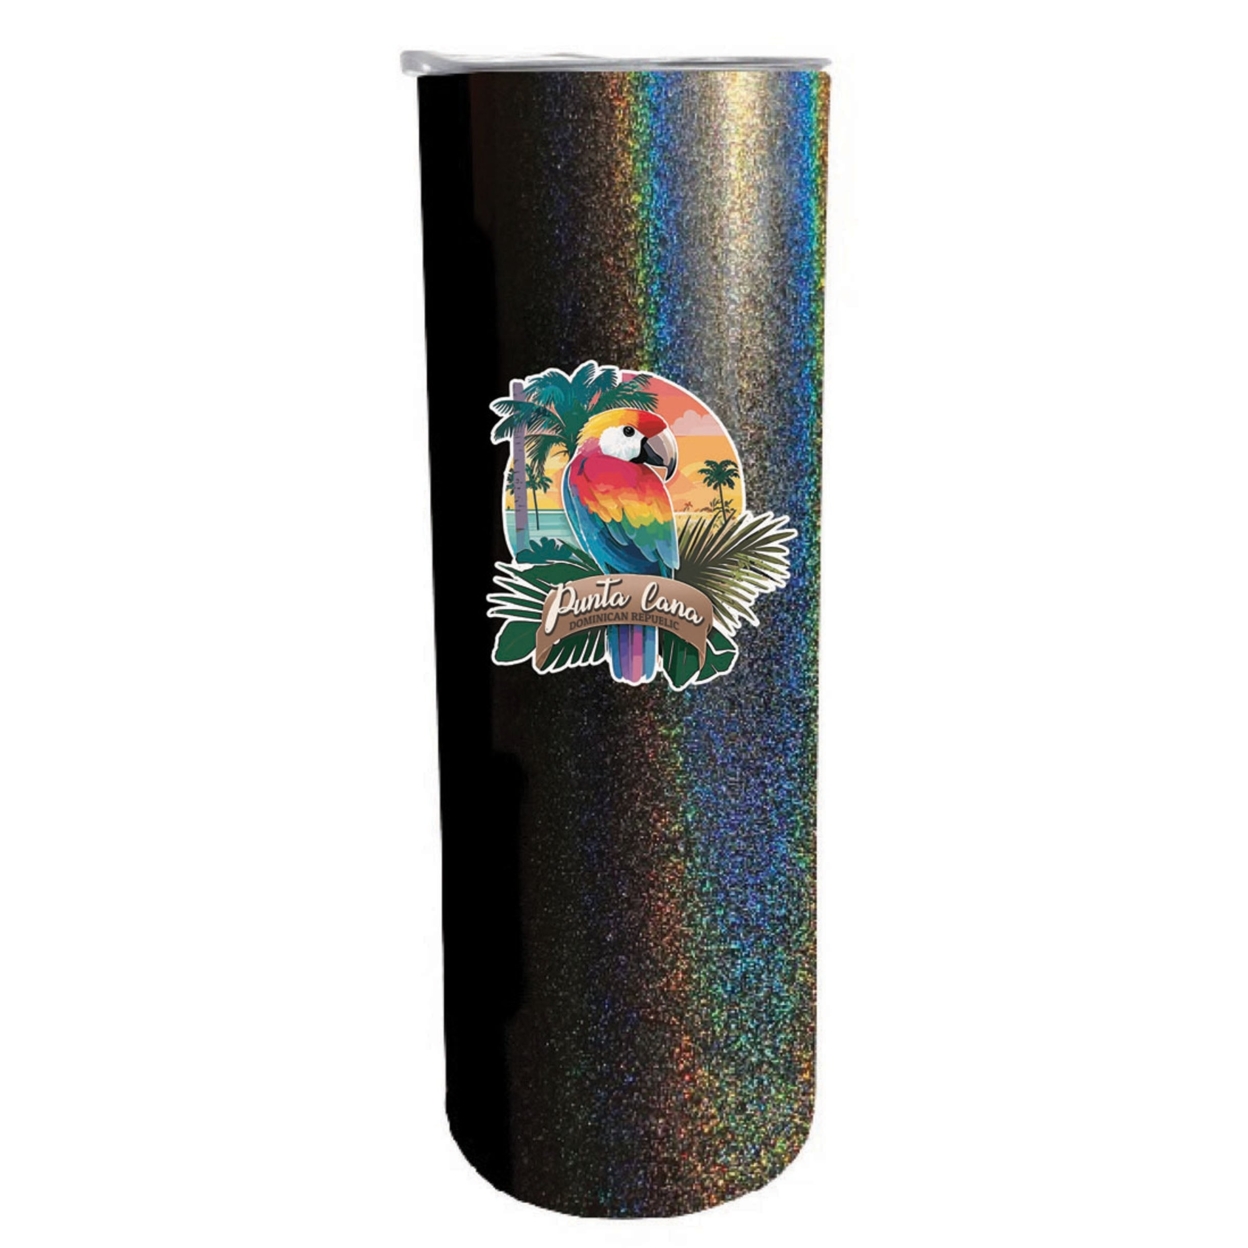 Punta Cana Dominican Republic Souvenir 20 Oz Insulated Stainless Steel Skinny Tumbler - Rainbow Glitter Gray, PARROT